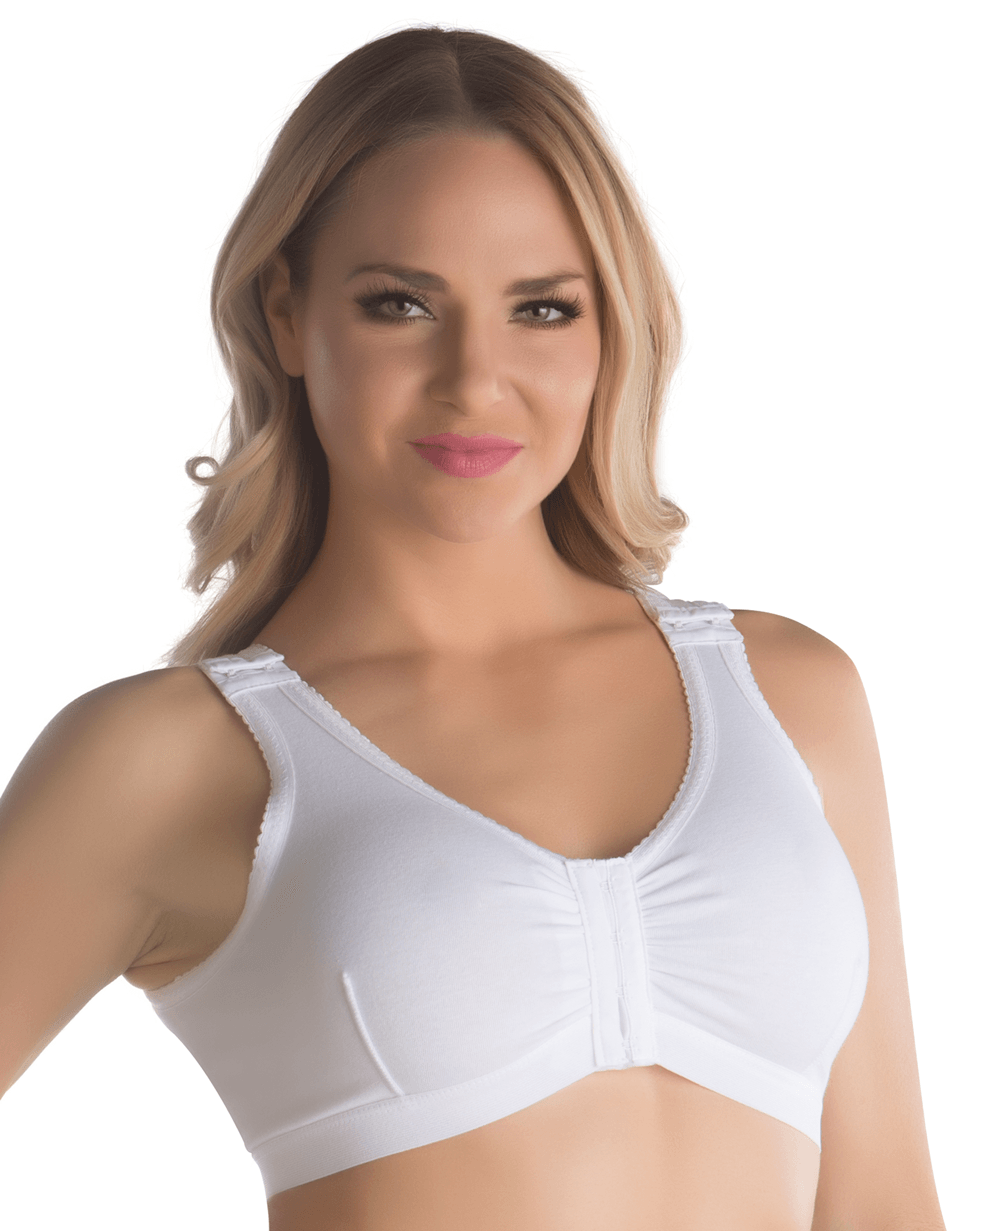 shyaway Nylon, Spandex Bra Price Starting From Rs 1,163. Find Verified  Sellers in Bangalore - JdMart